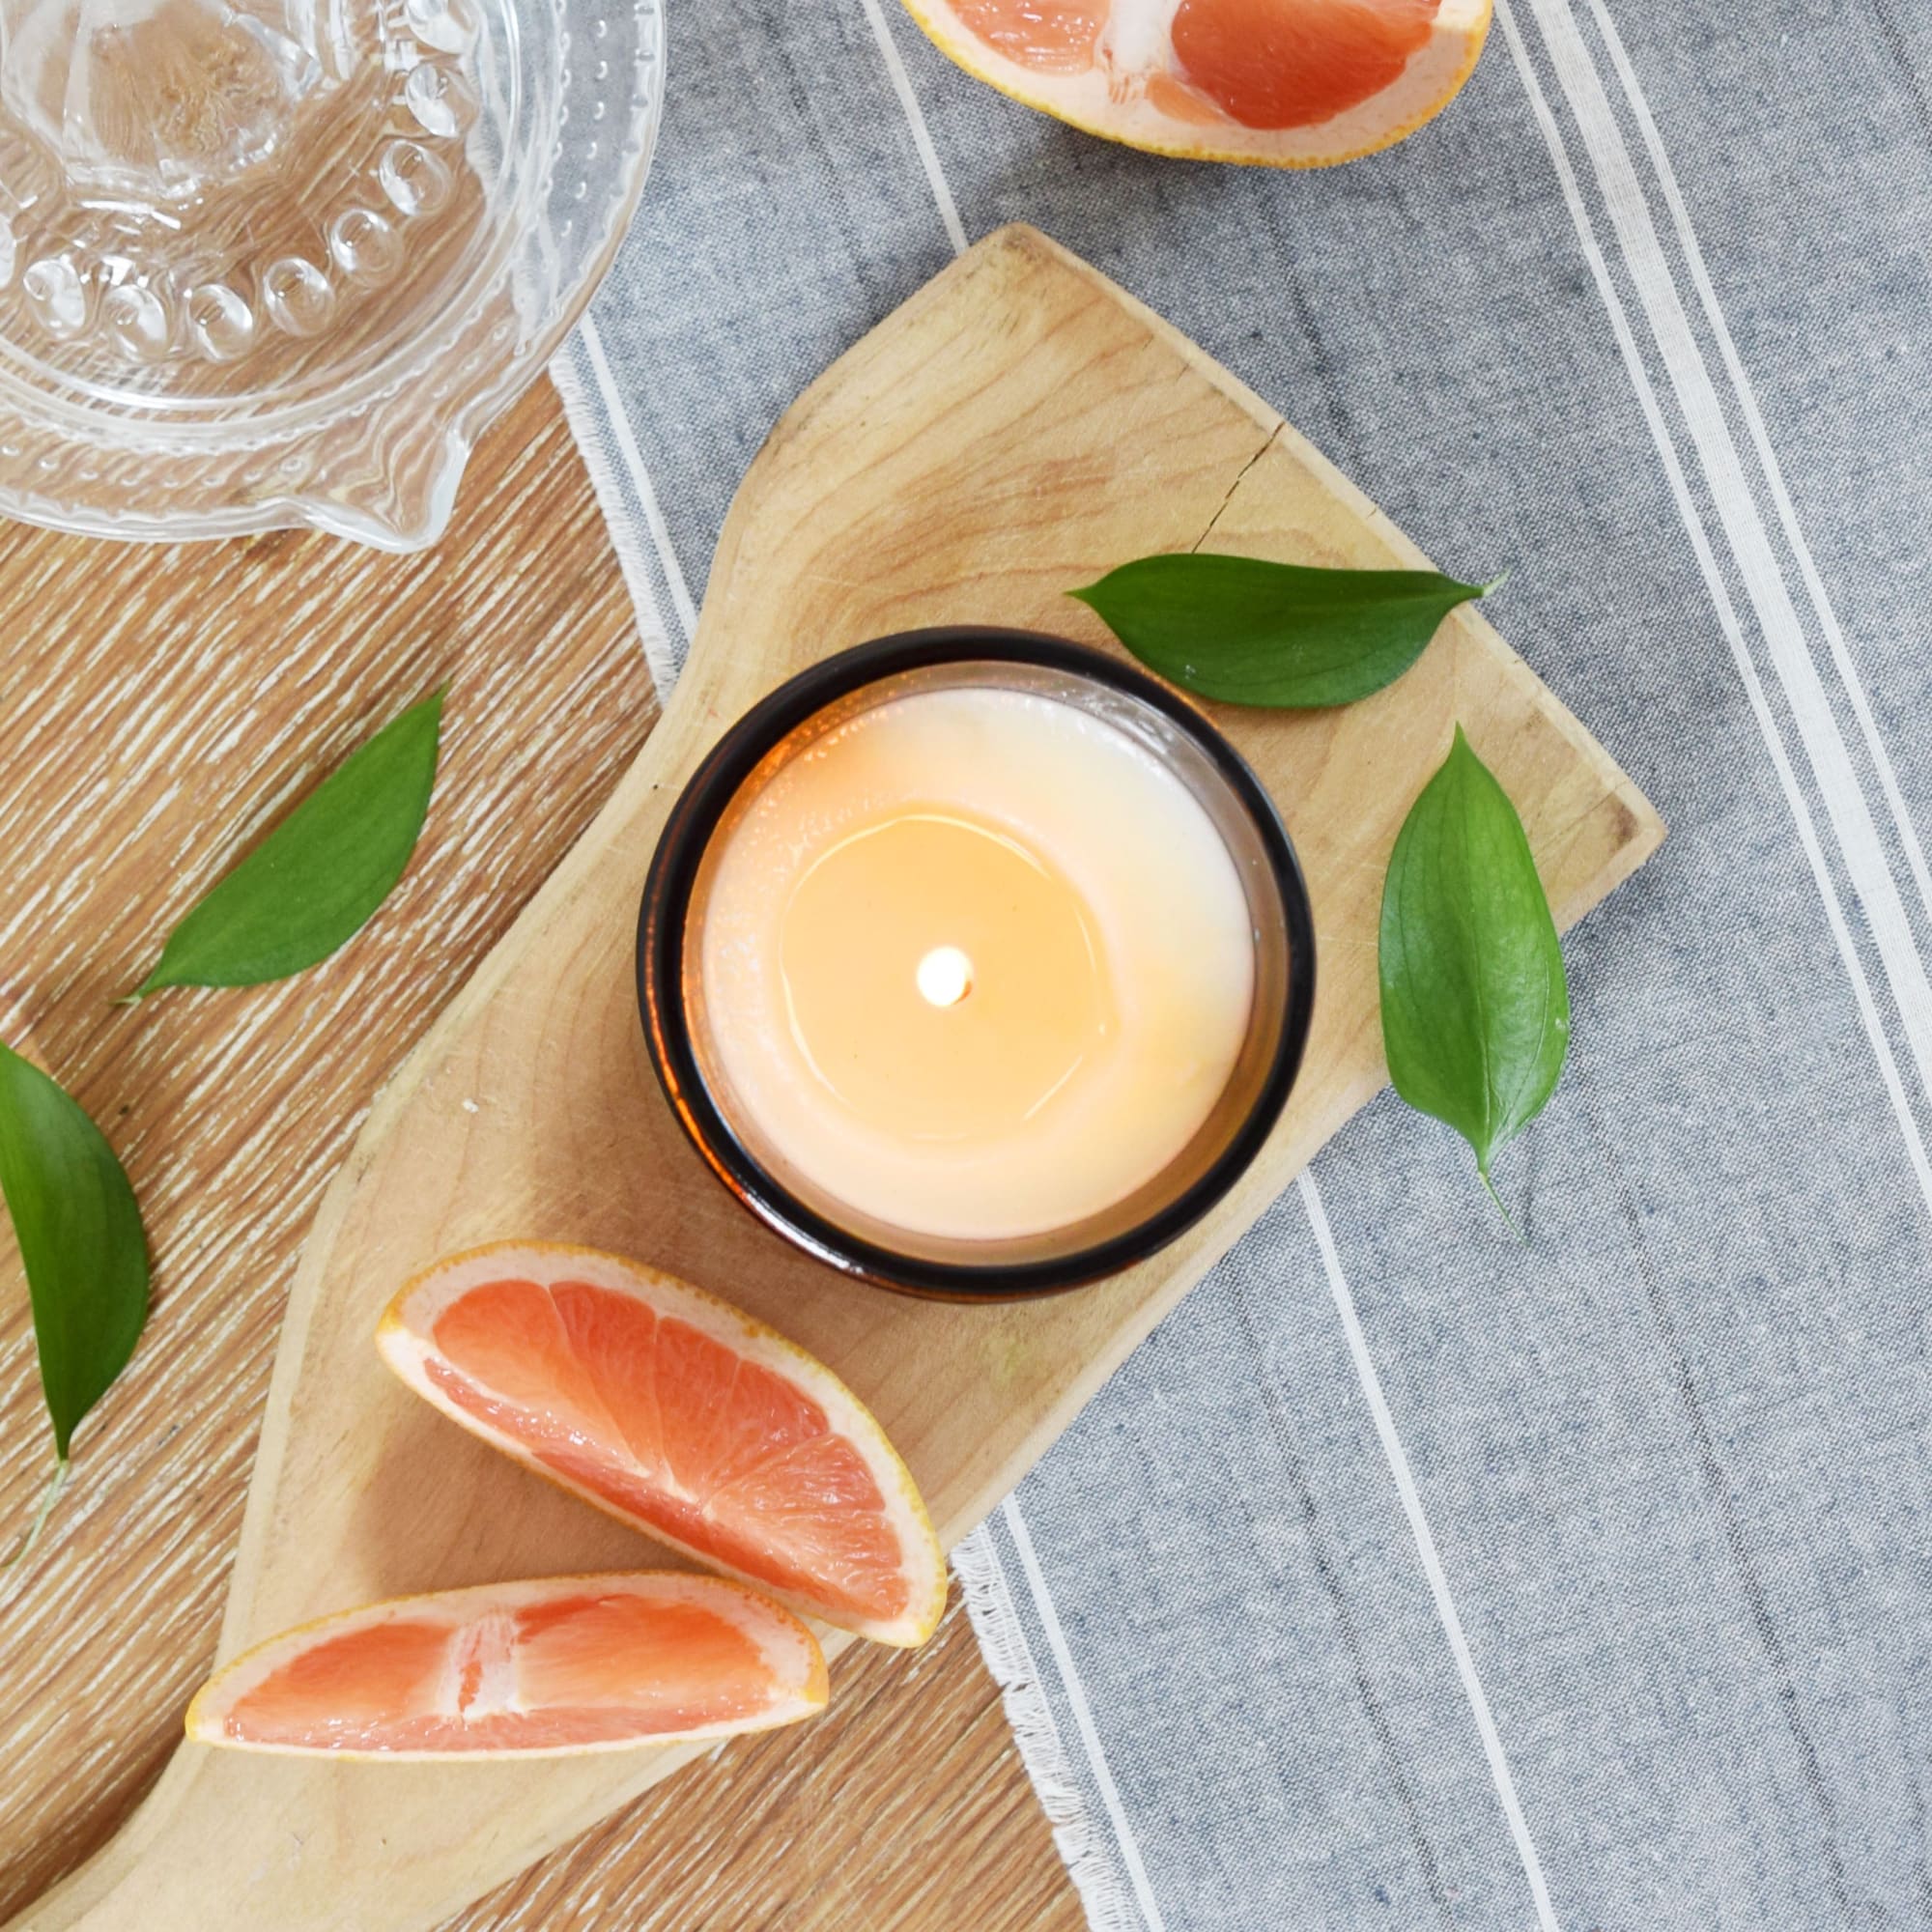 Peach Soy Candle | The Baltic Club